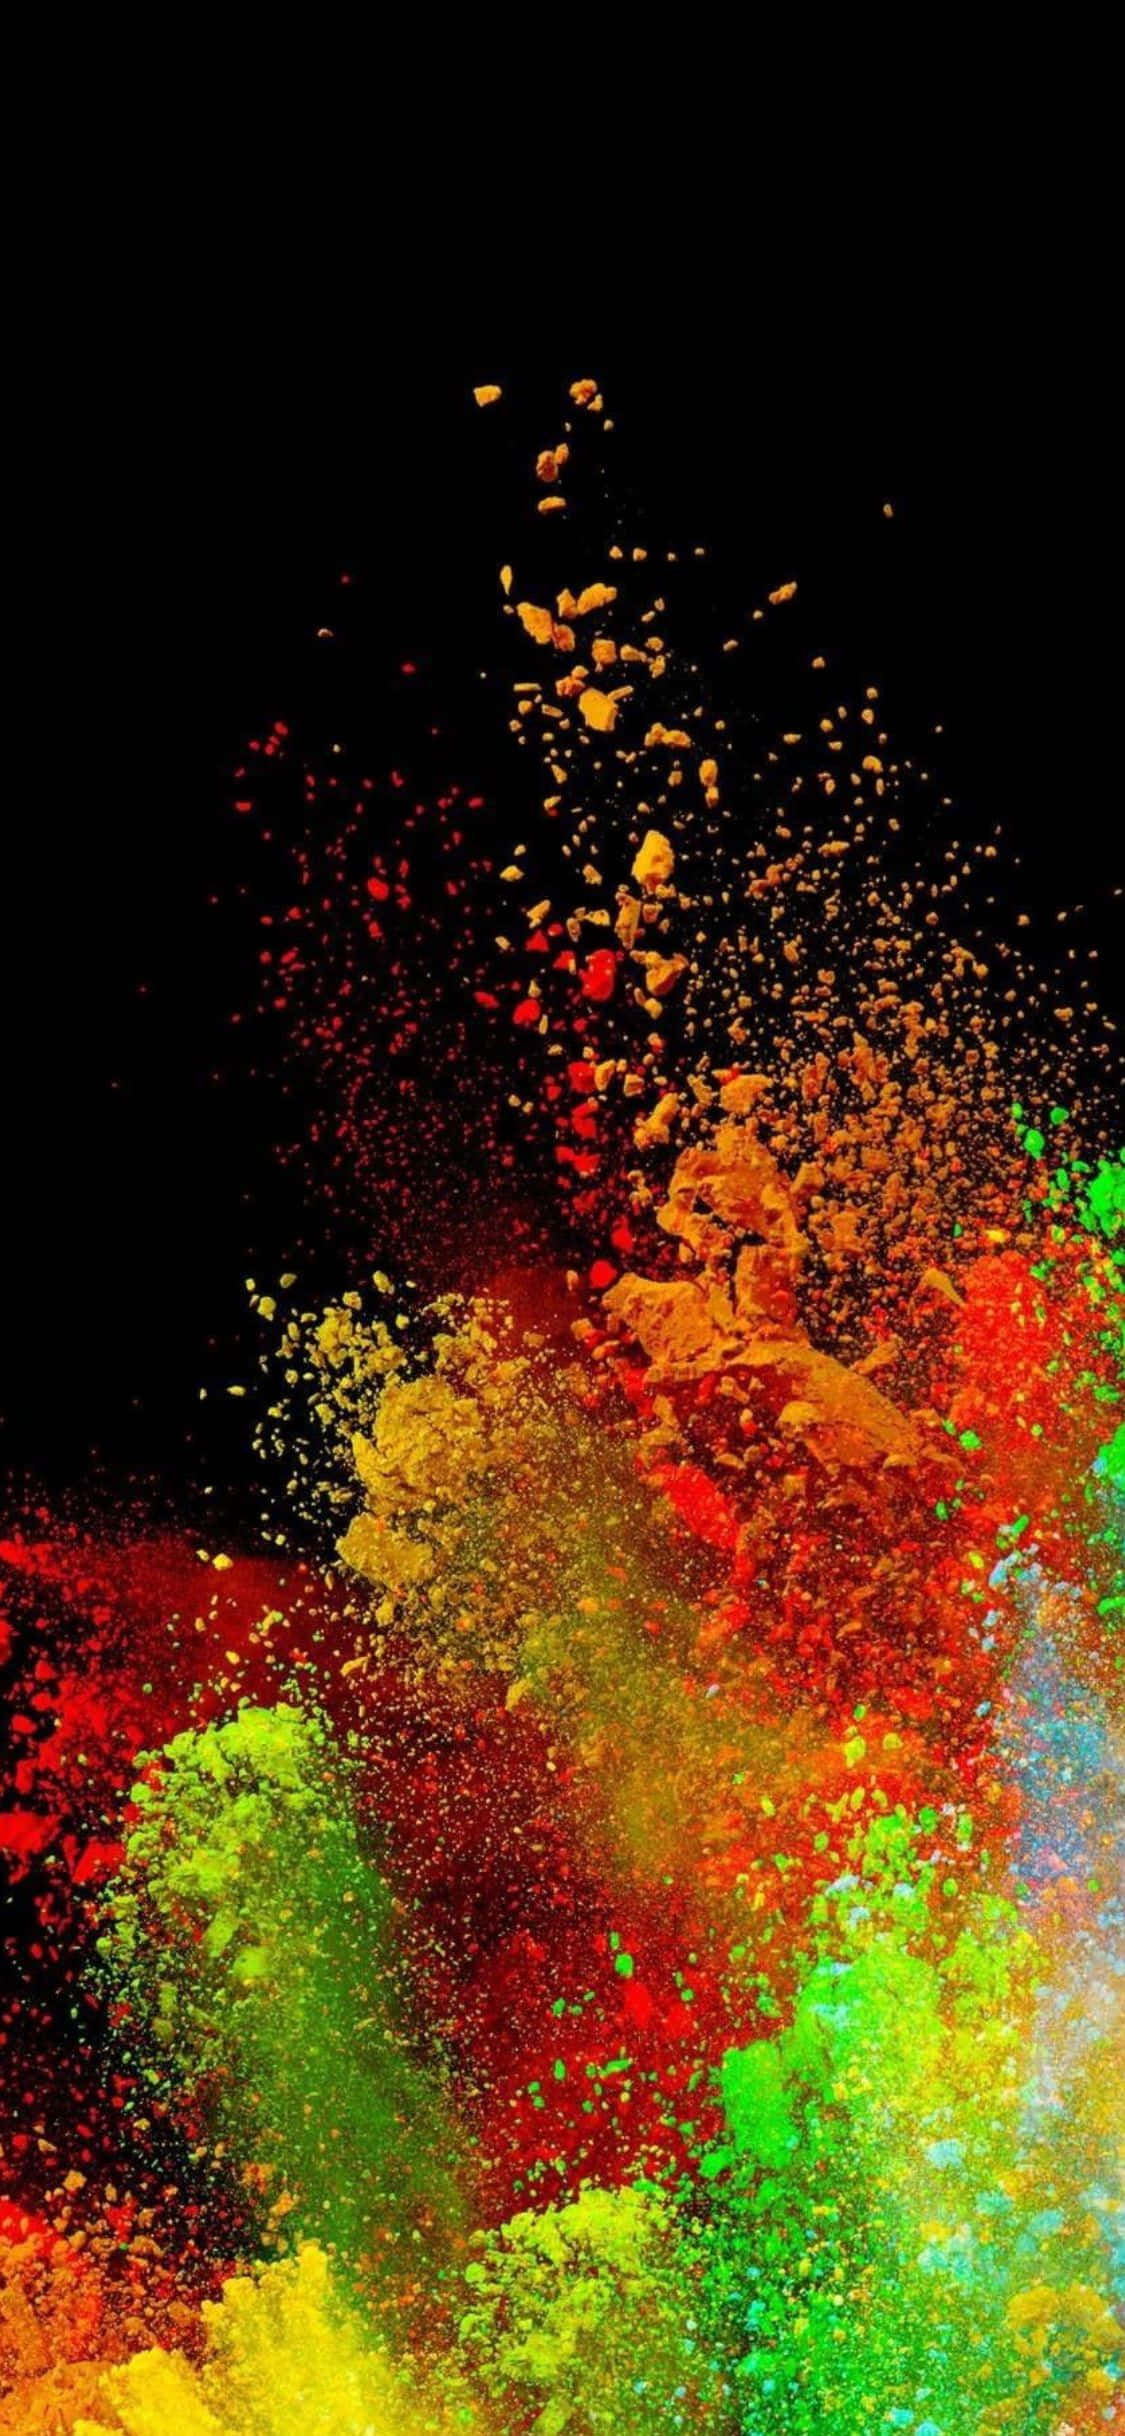 colorful powder falling on a black background